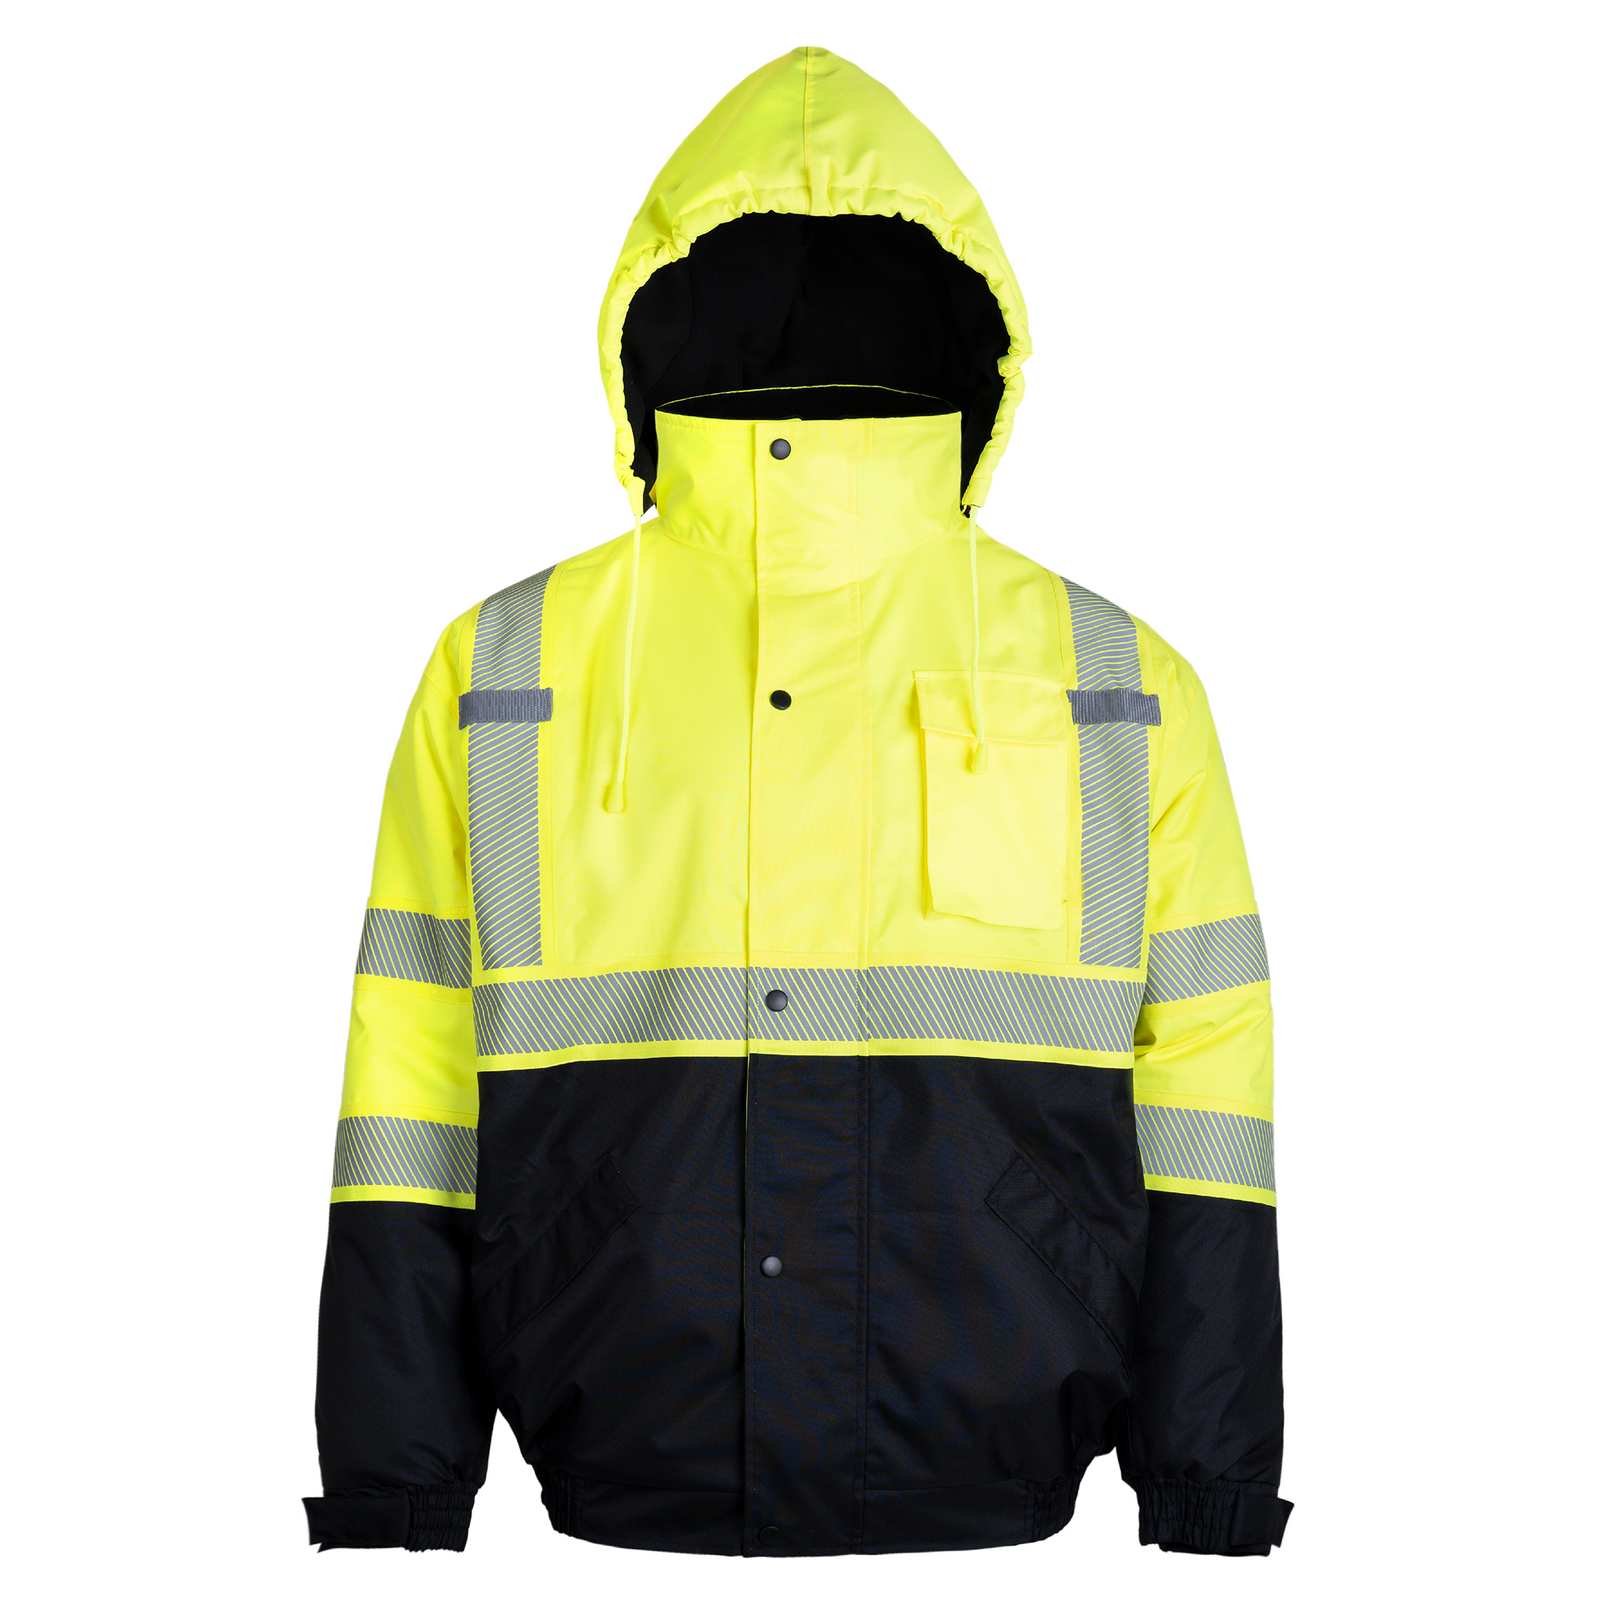 Waterproof yellow and black Hi-vis safety bomber jacket with heat transfer reflective tapes and detachable hoodie